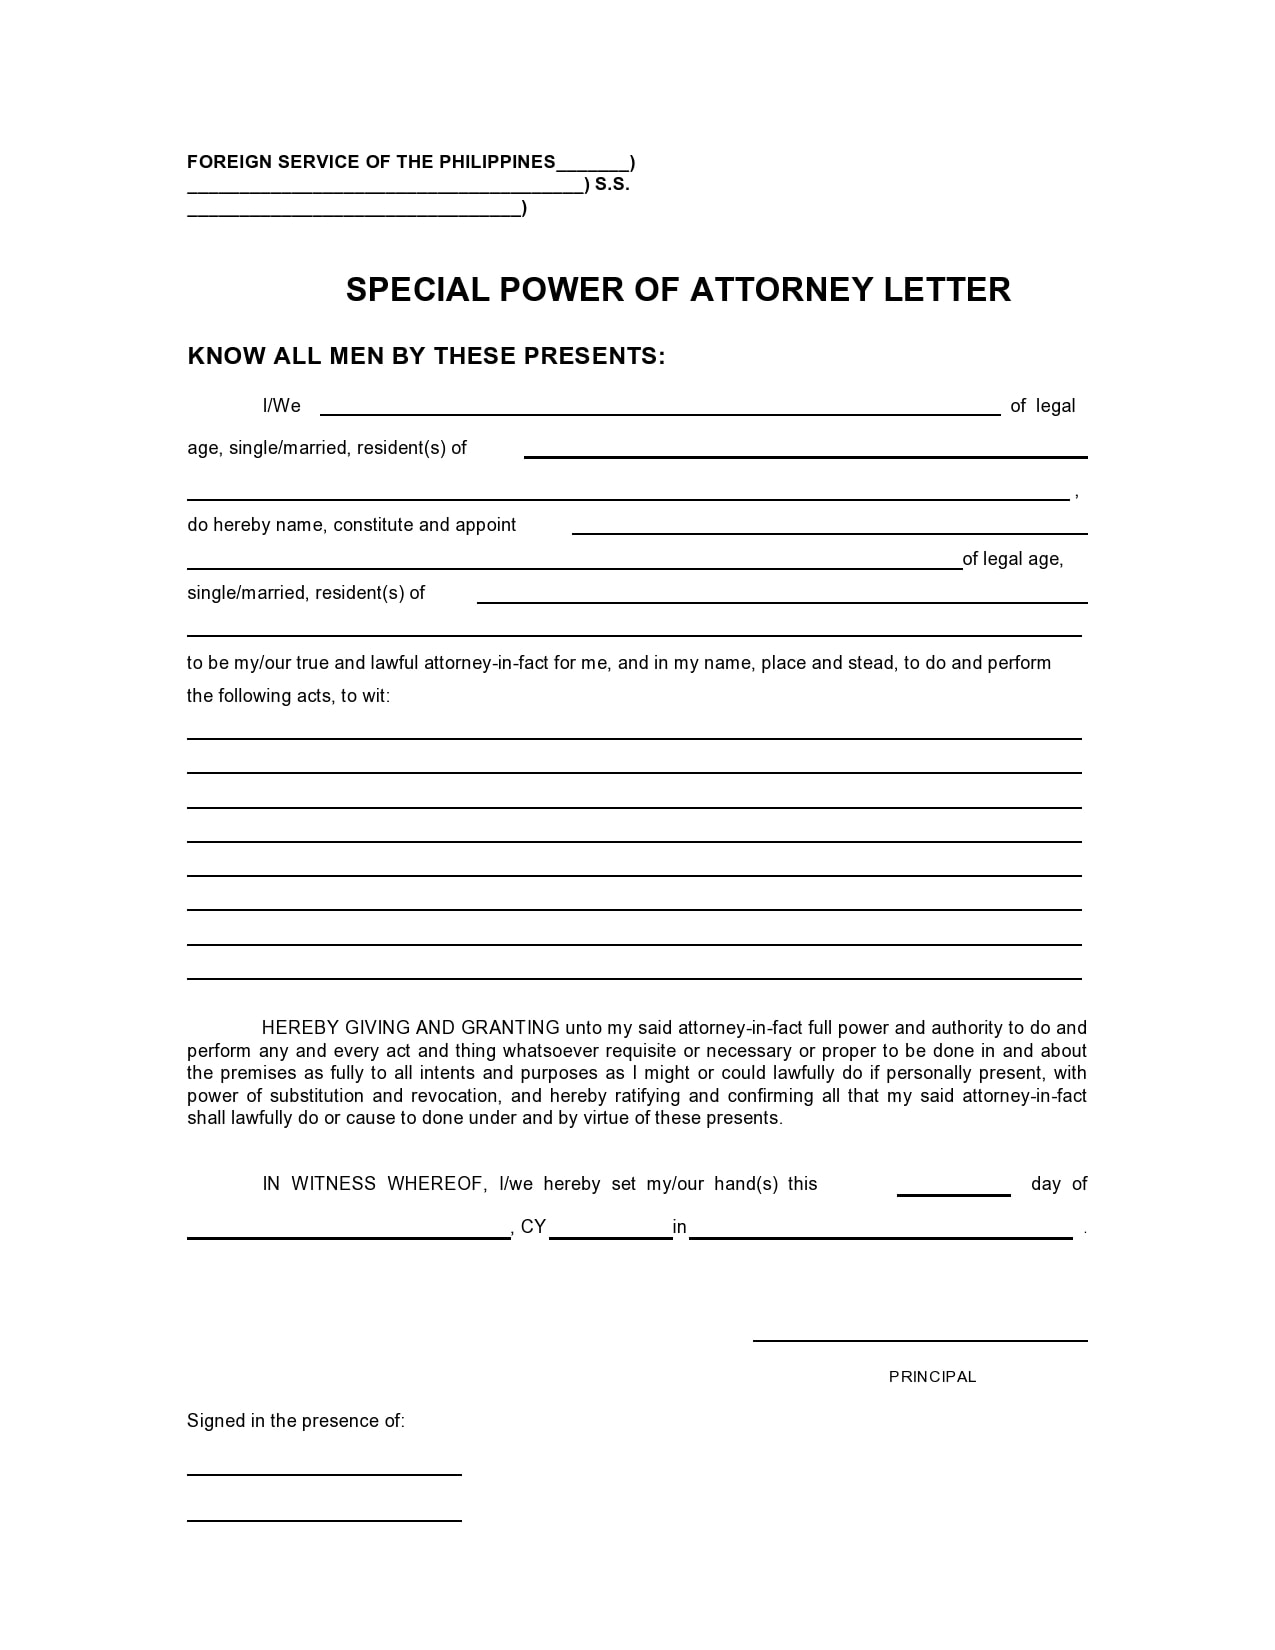 27 Professional Power of Attorney Letters & Examples